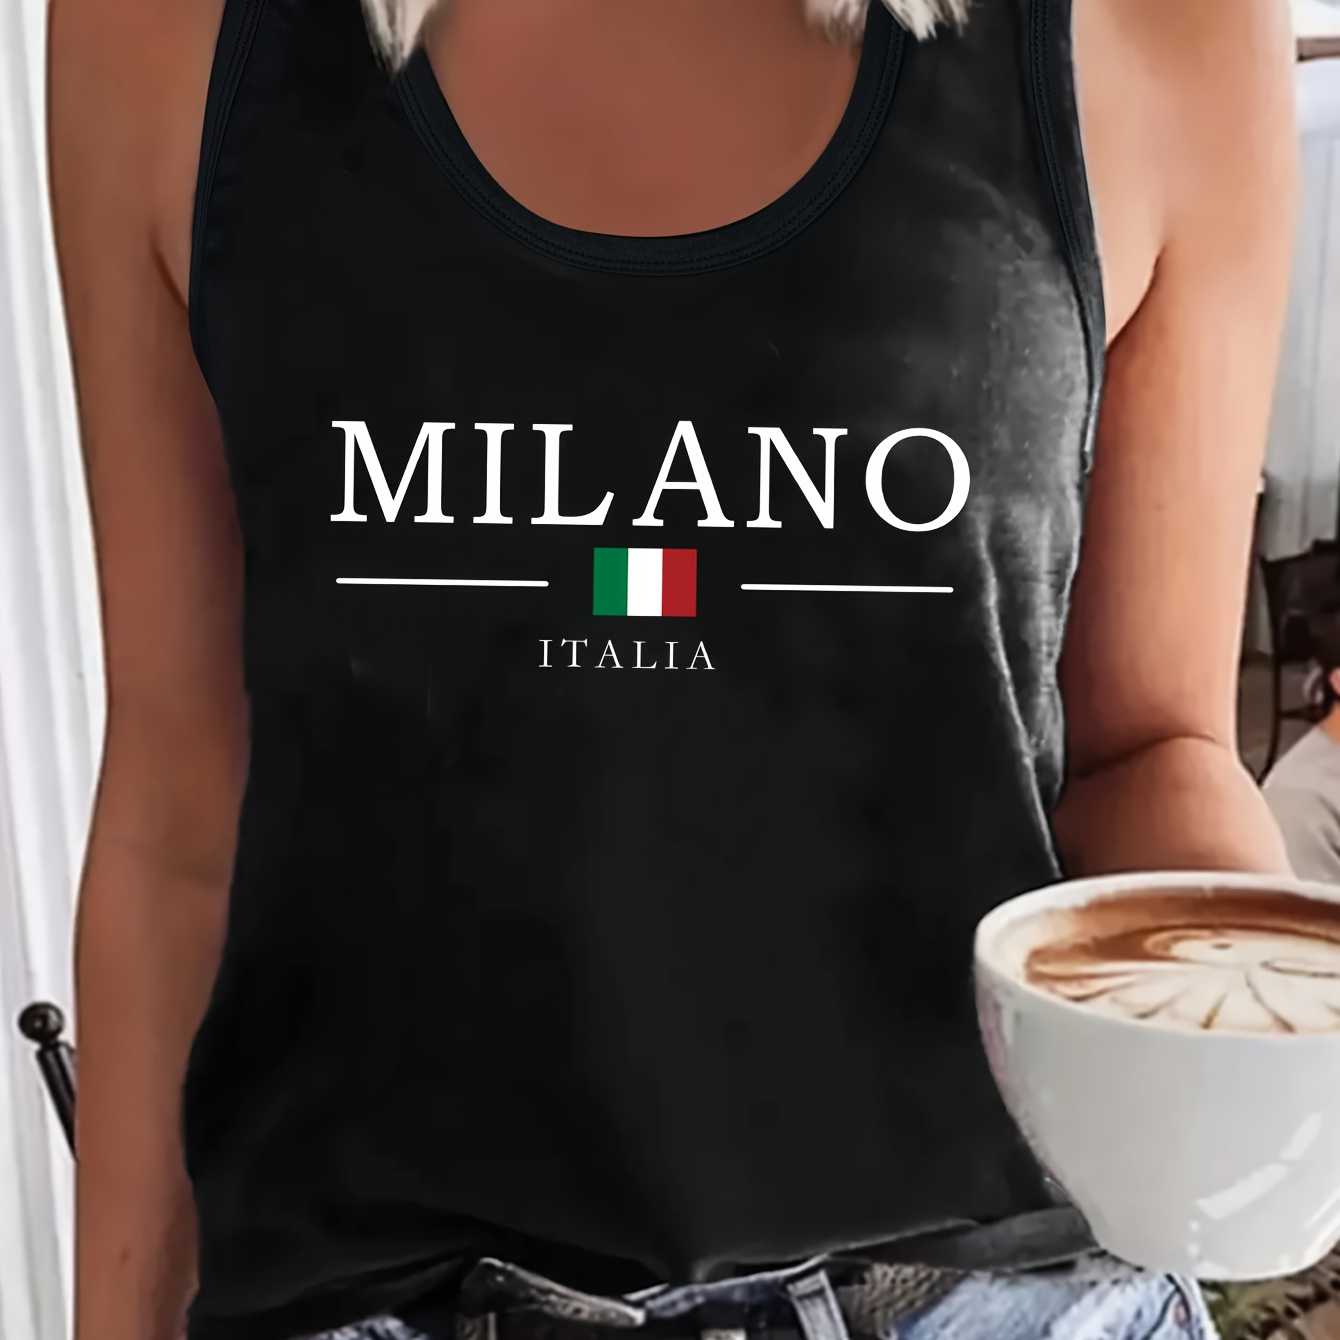 

Milano Print Crew Neck Tank Top, Sleeveless Casual Top For Summer & Spring, Women's Clothing